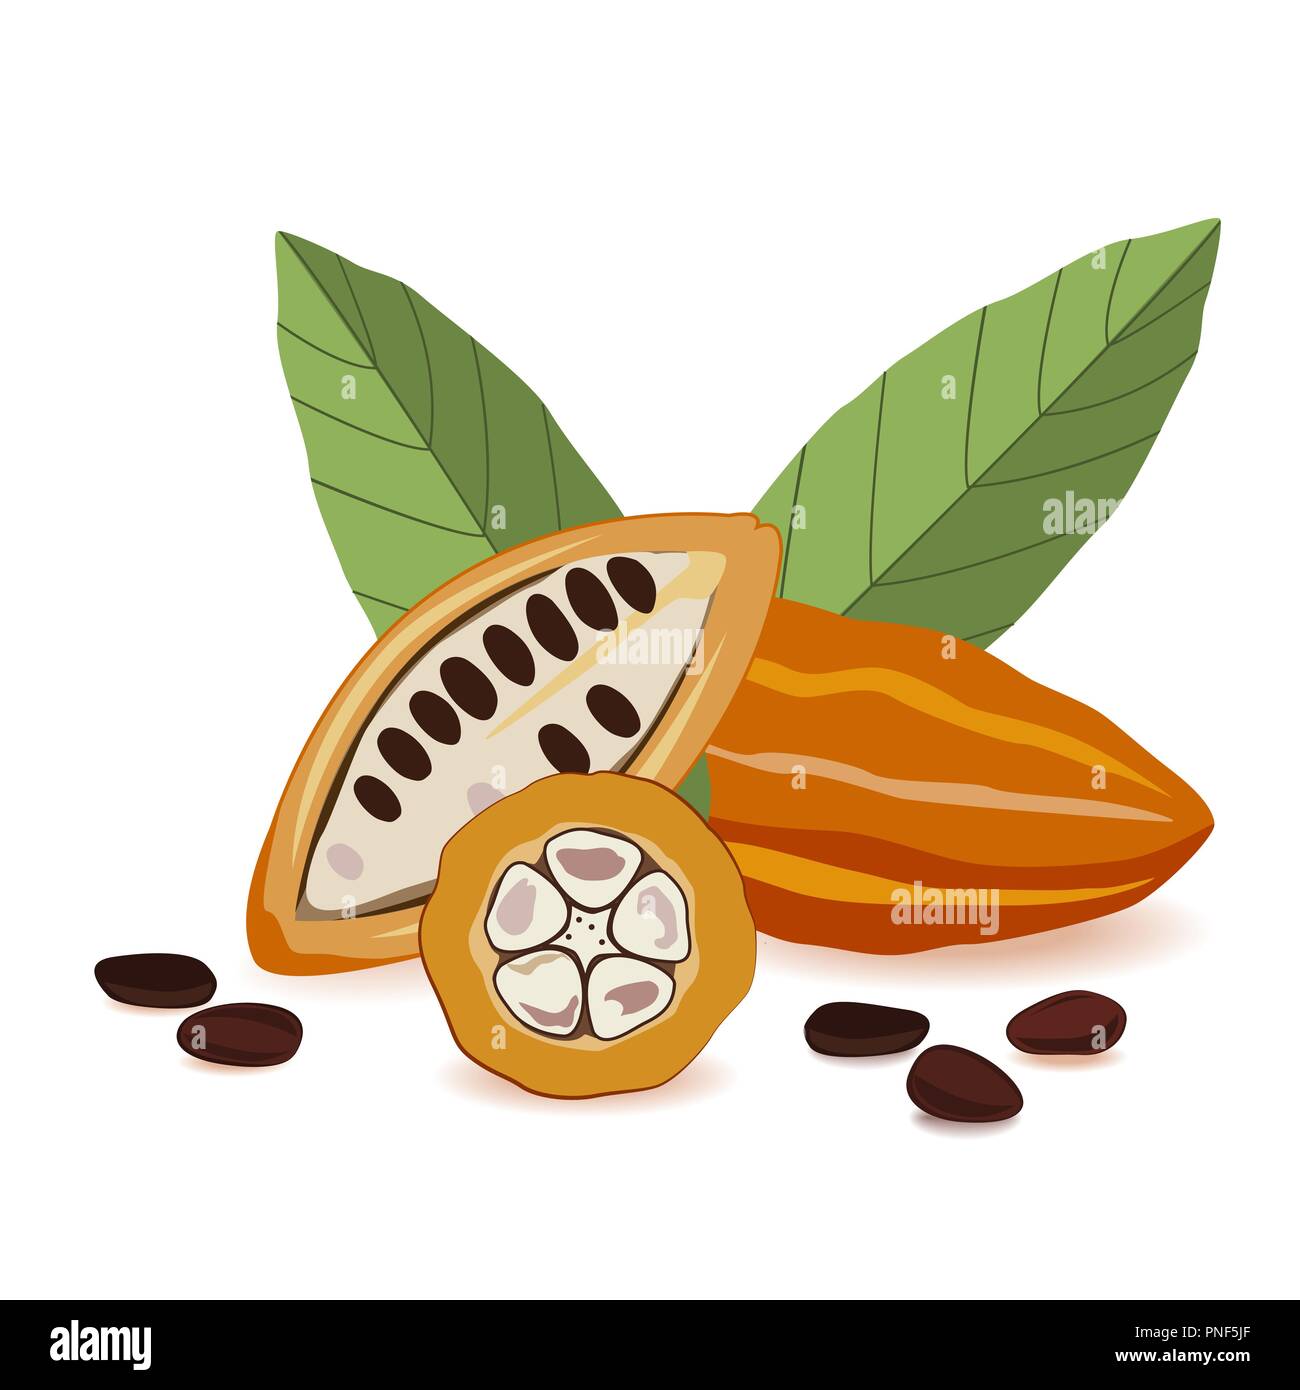 Cacao fruit, raw cacao beans with leaves composition. Cocoa pod on white background. Vector illustration Stock Vector